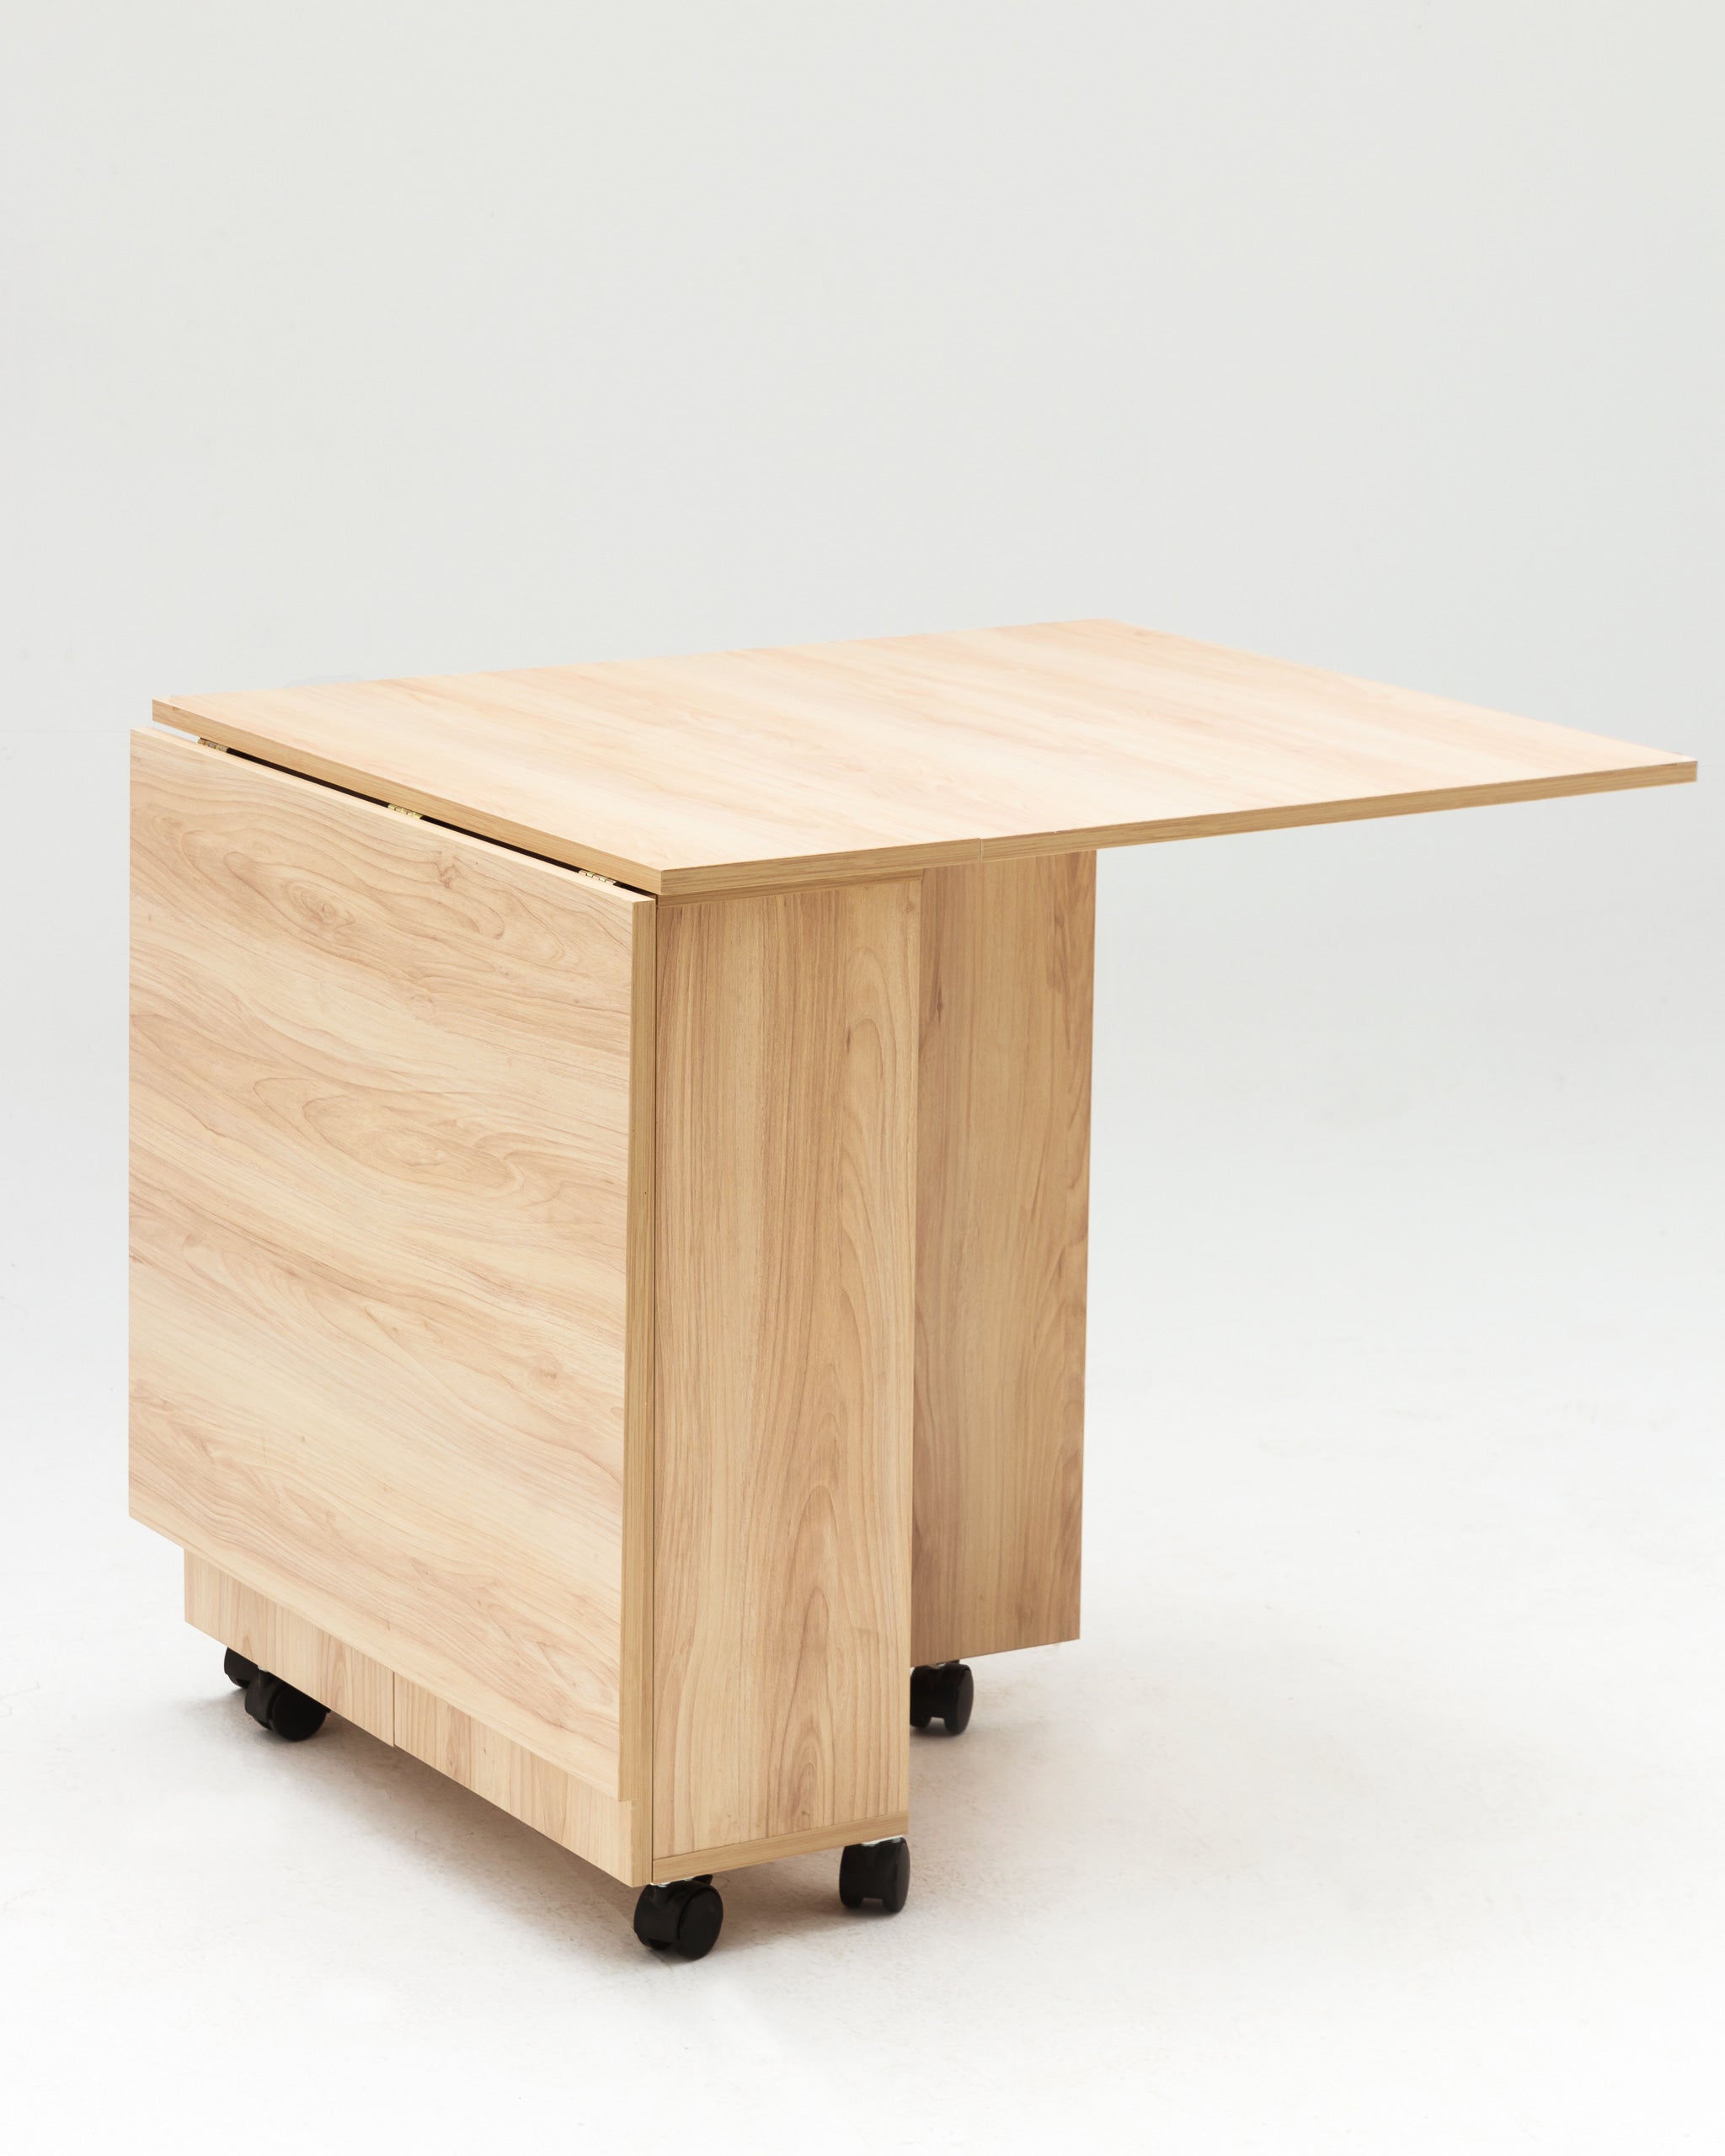 The Expandable Table